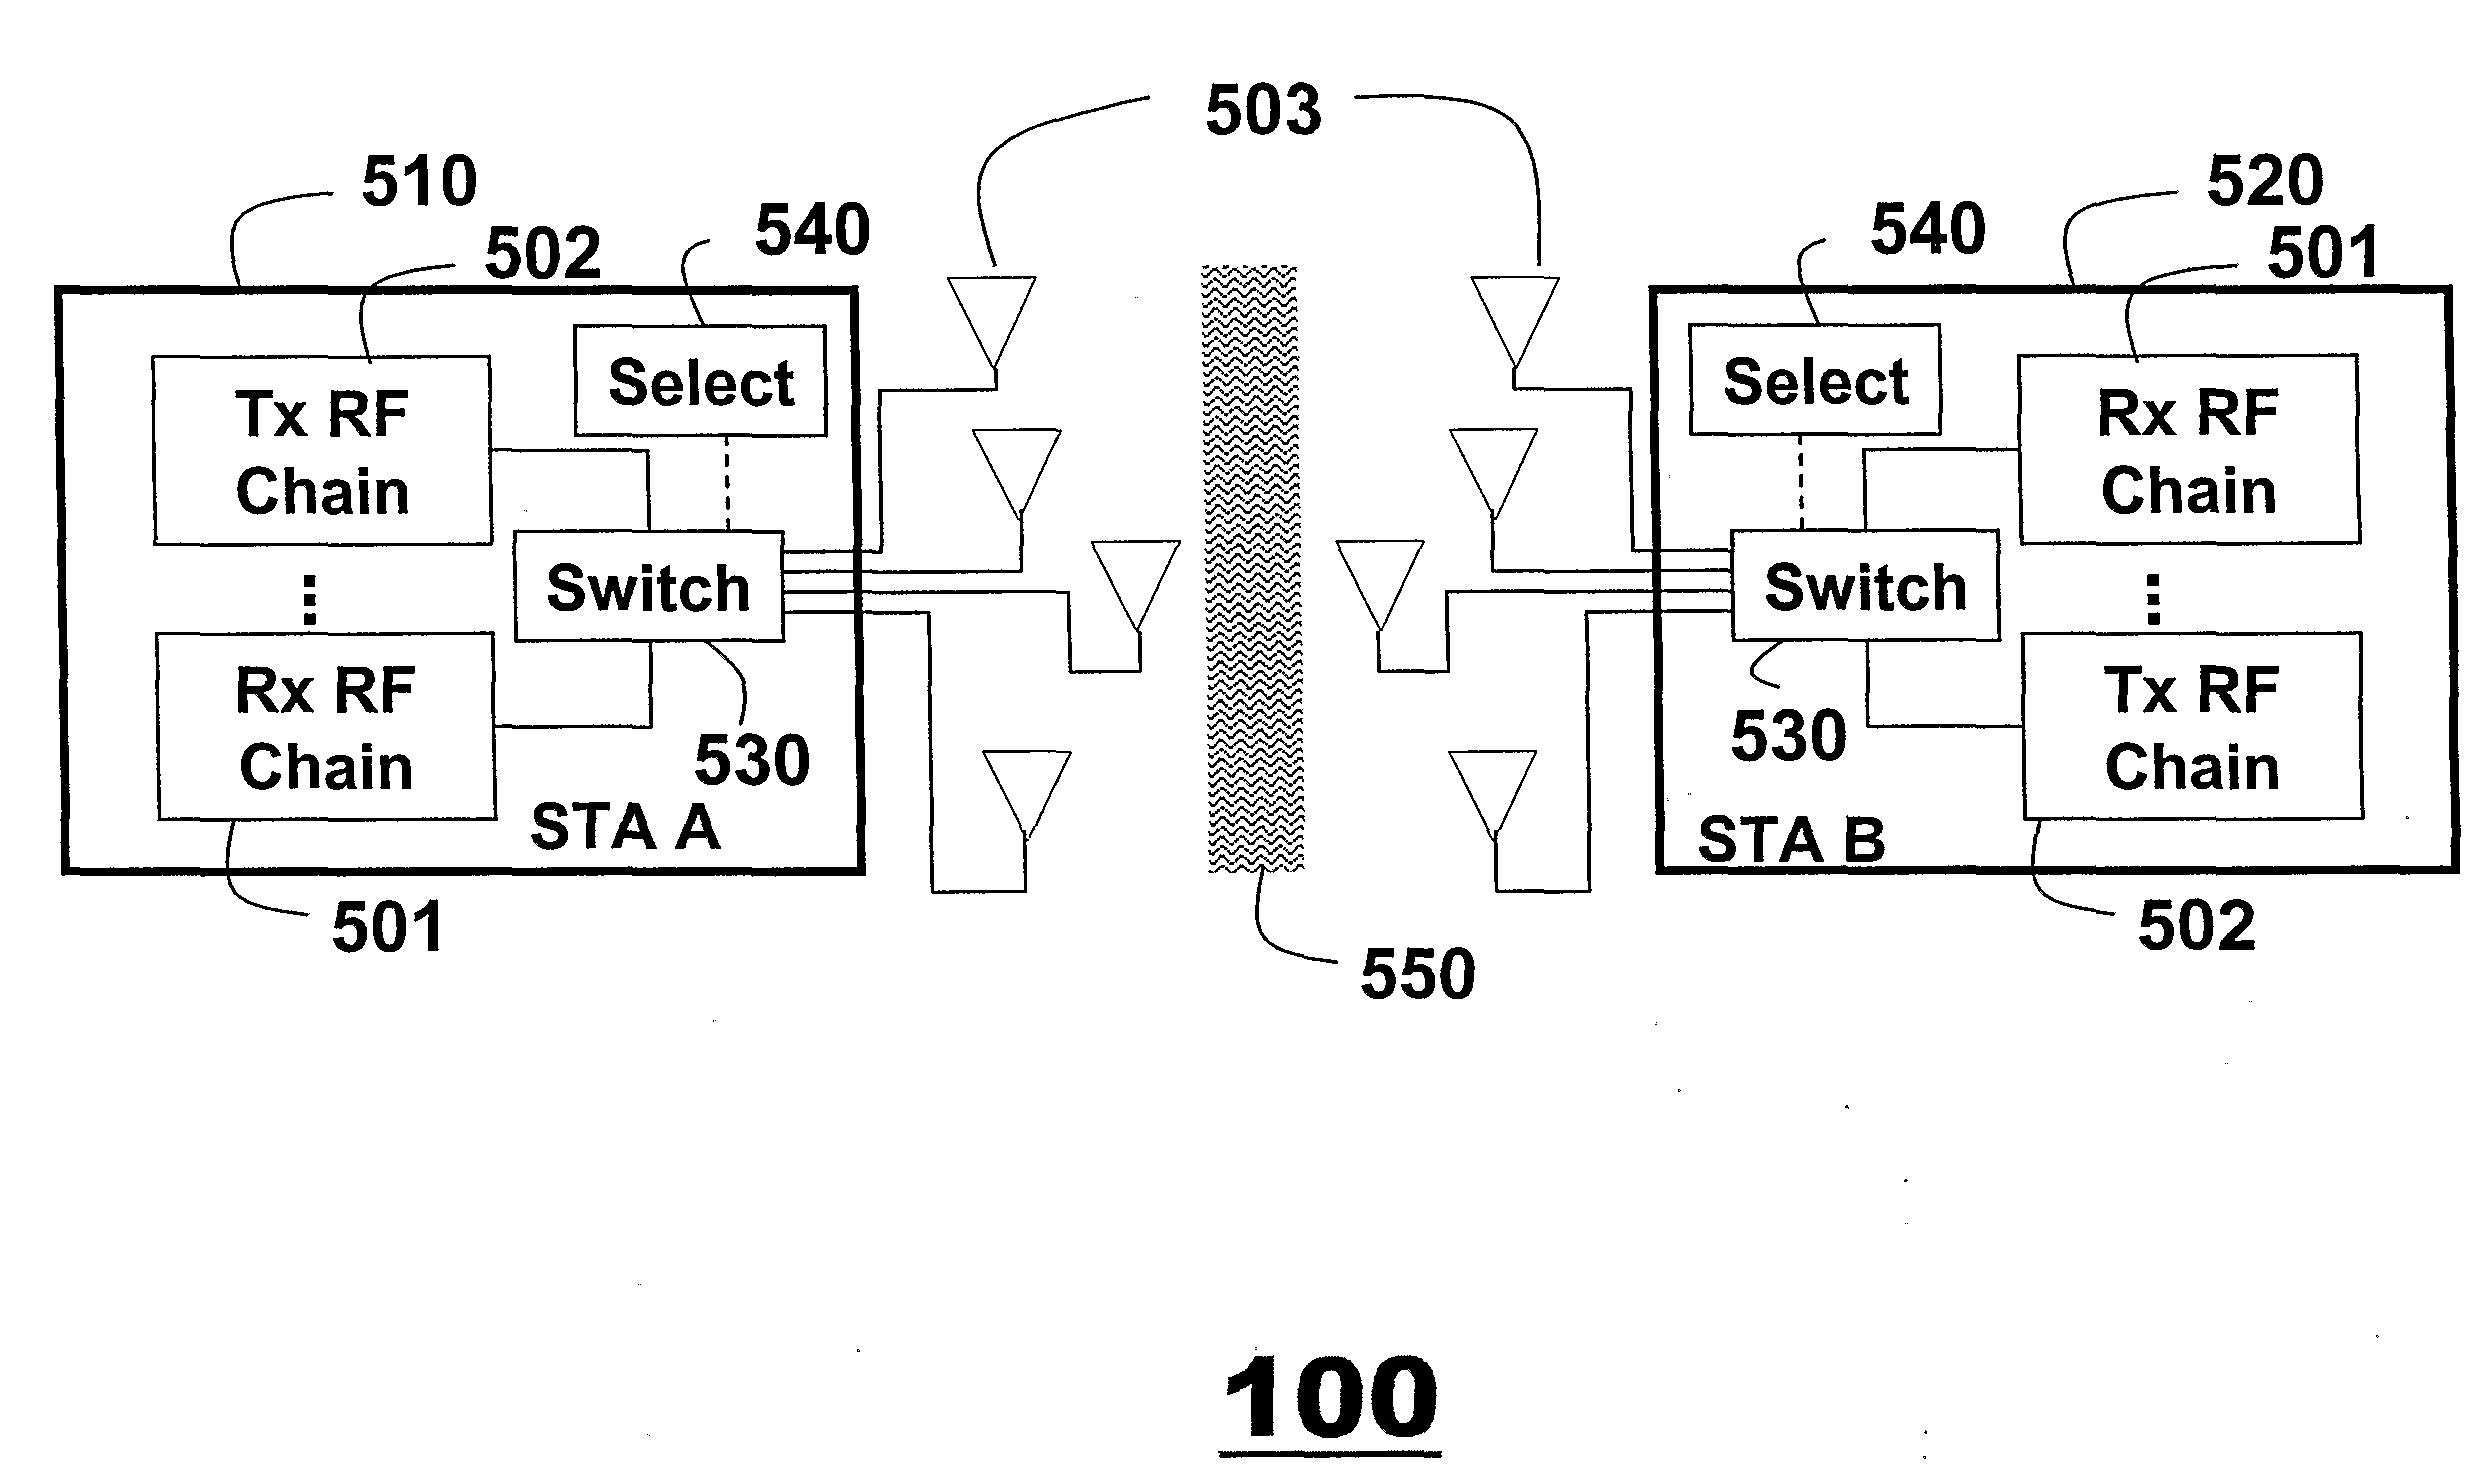 Method for Selecting Antennas and Beams in MIMO Wireless LANs